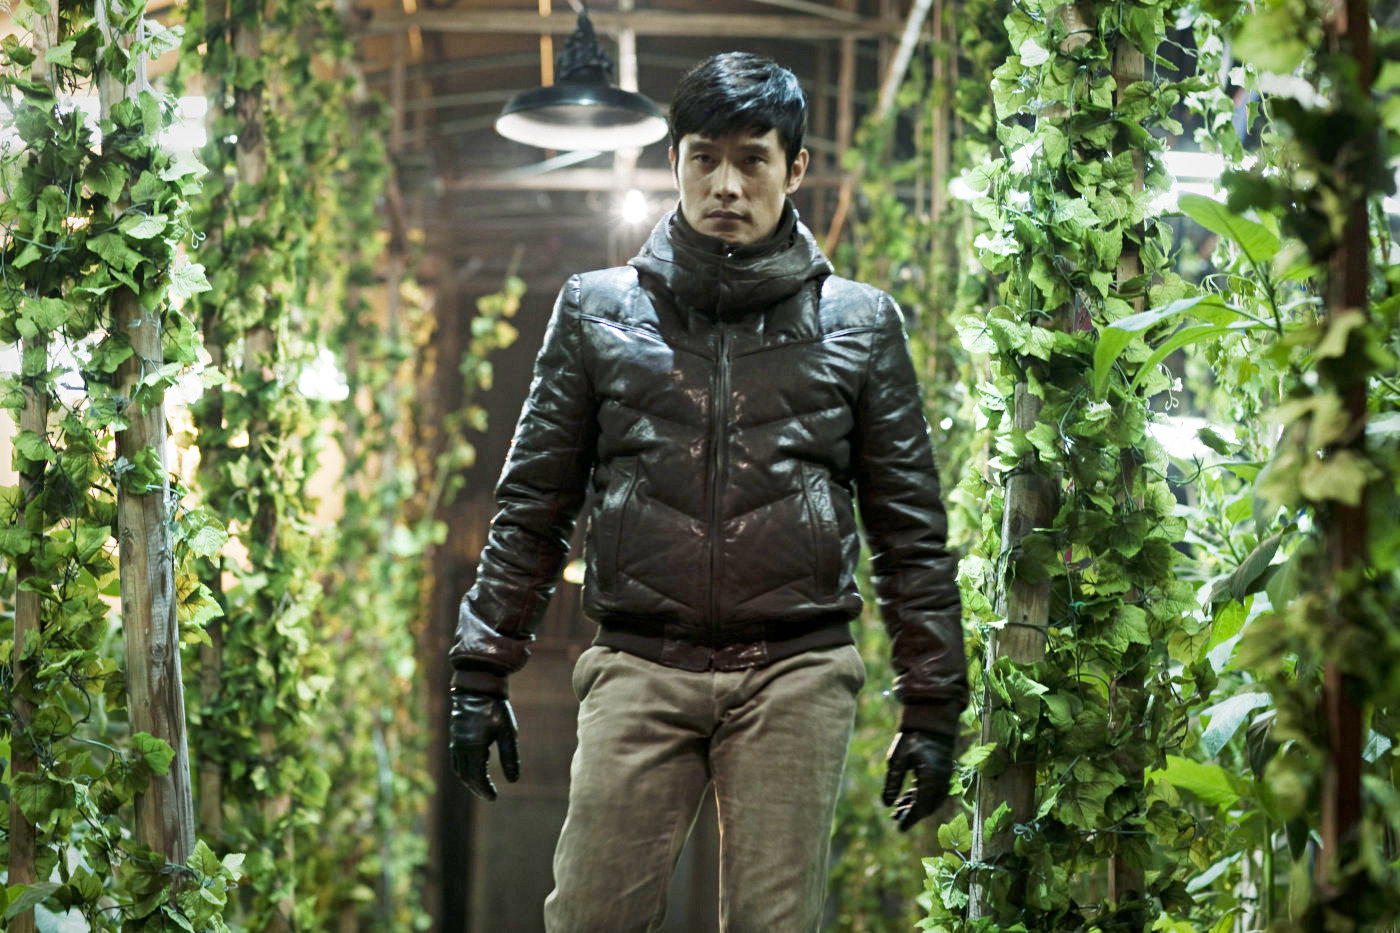 Byung-hun Lee stars as Kim Soo-hyeon in Magnet Releasing's I Saw the Devil (2011)